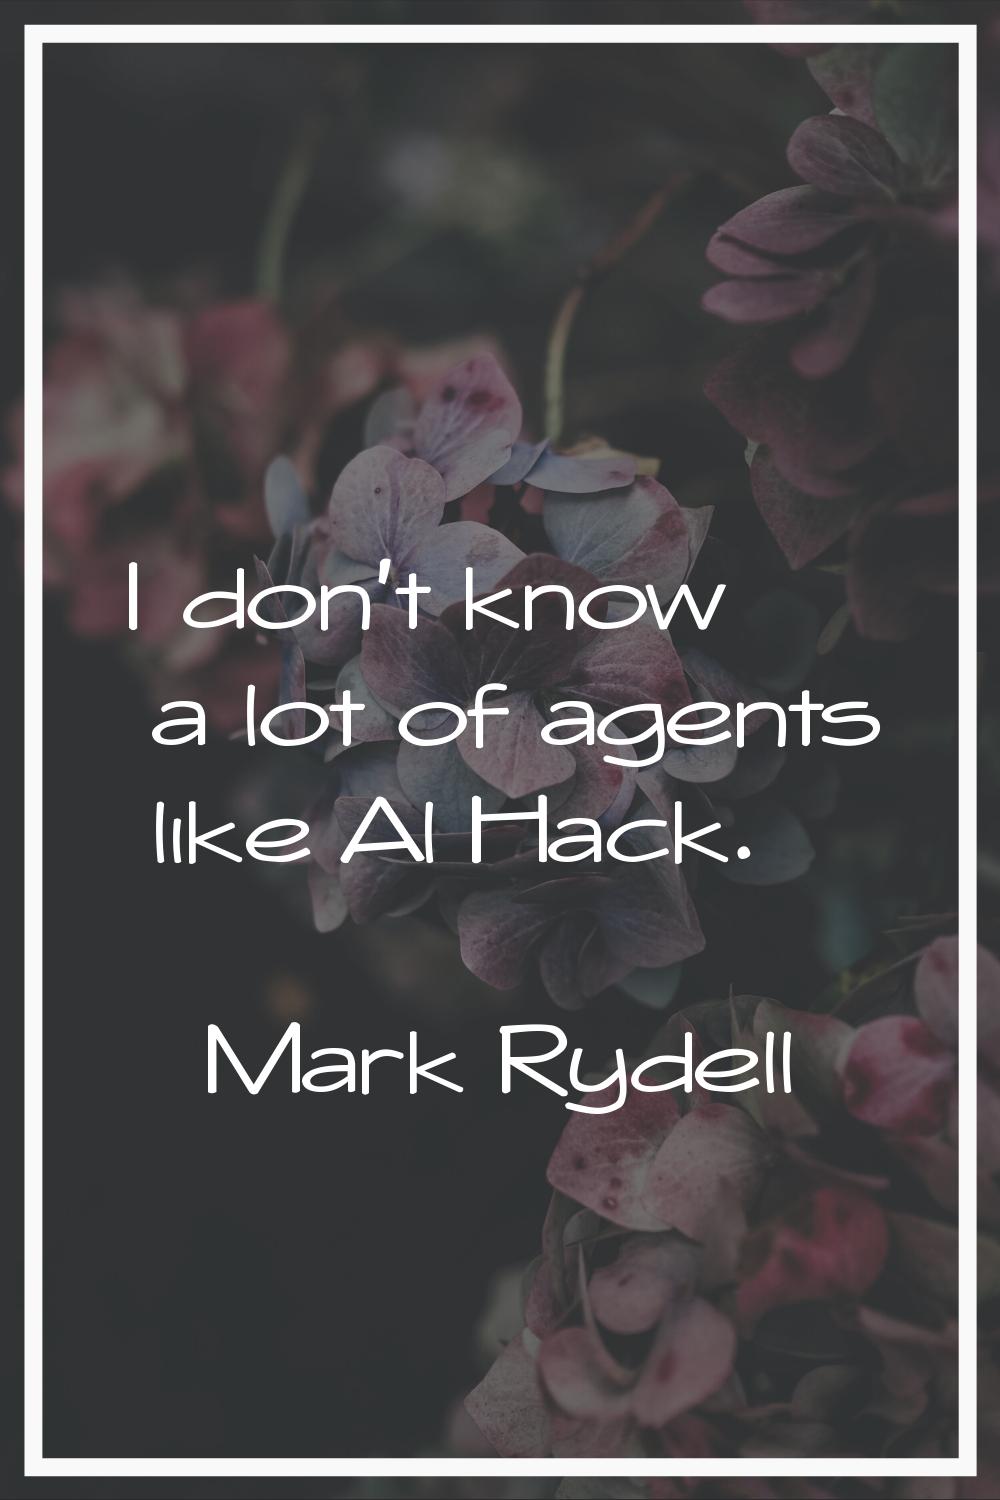 I don't know a lot of agents like Al Hack.